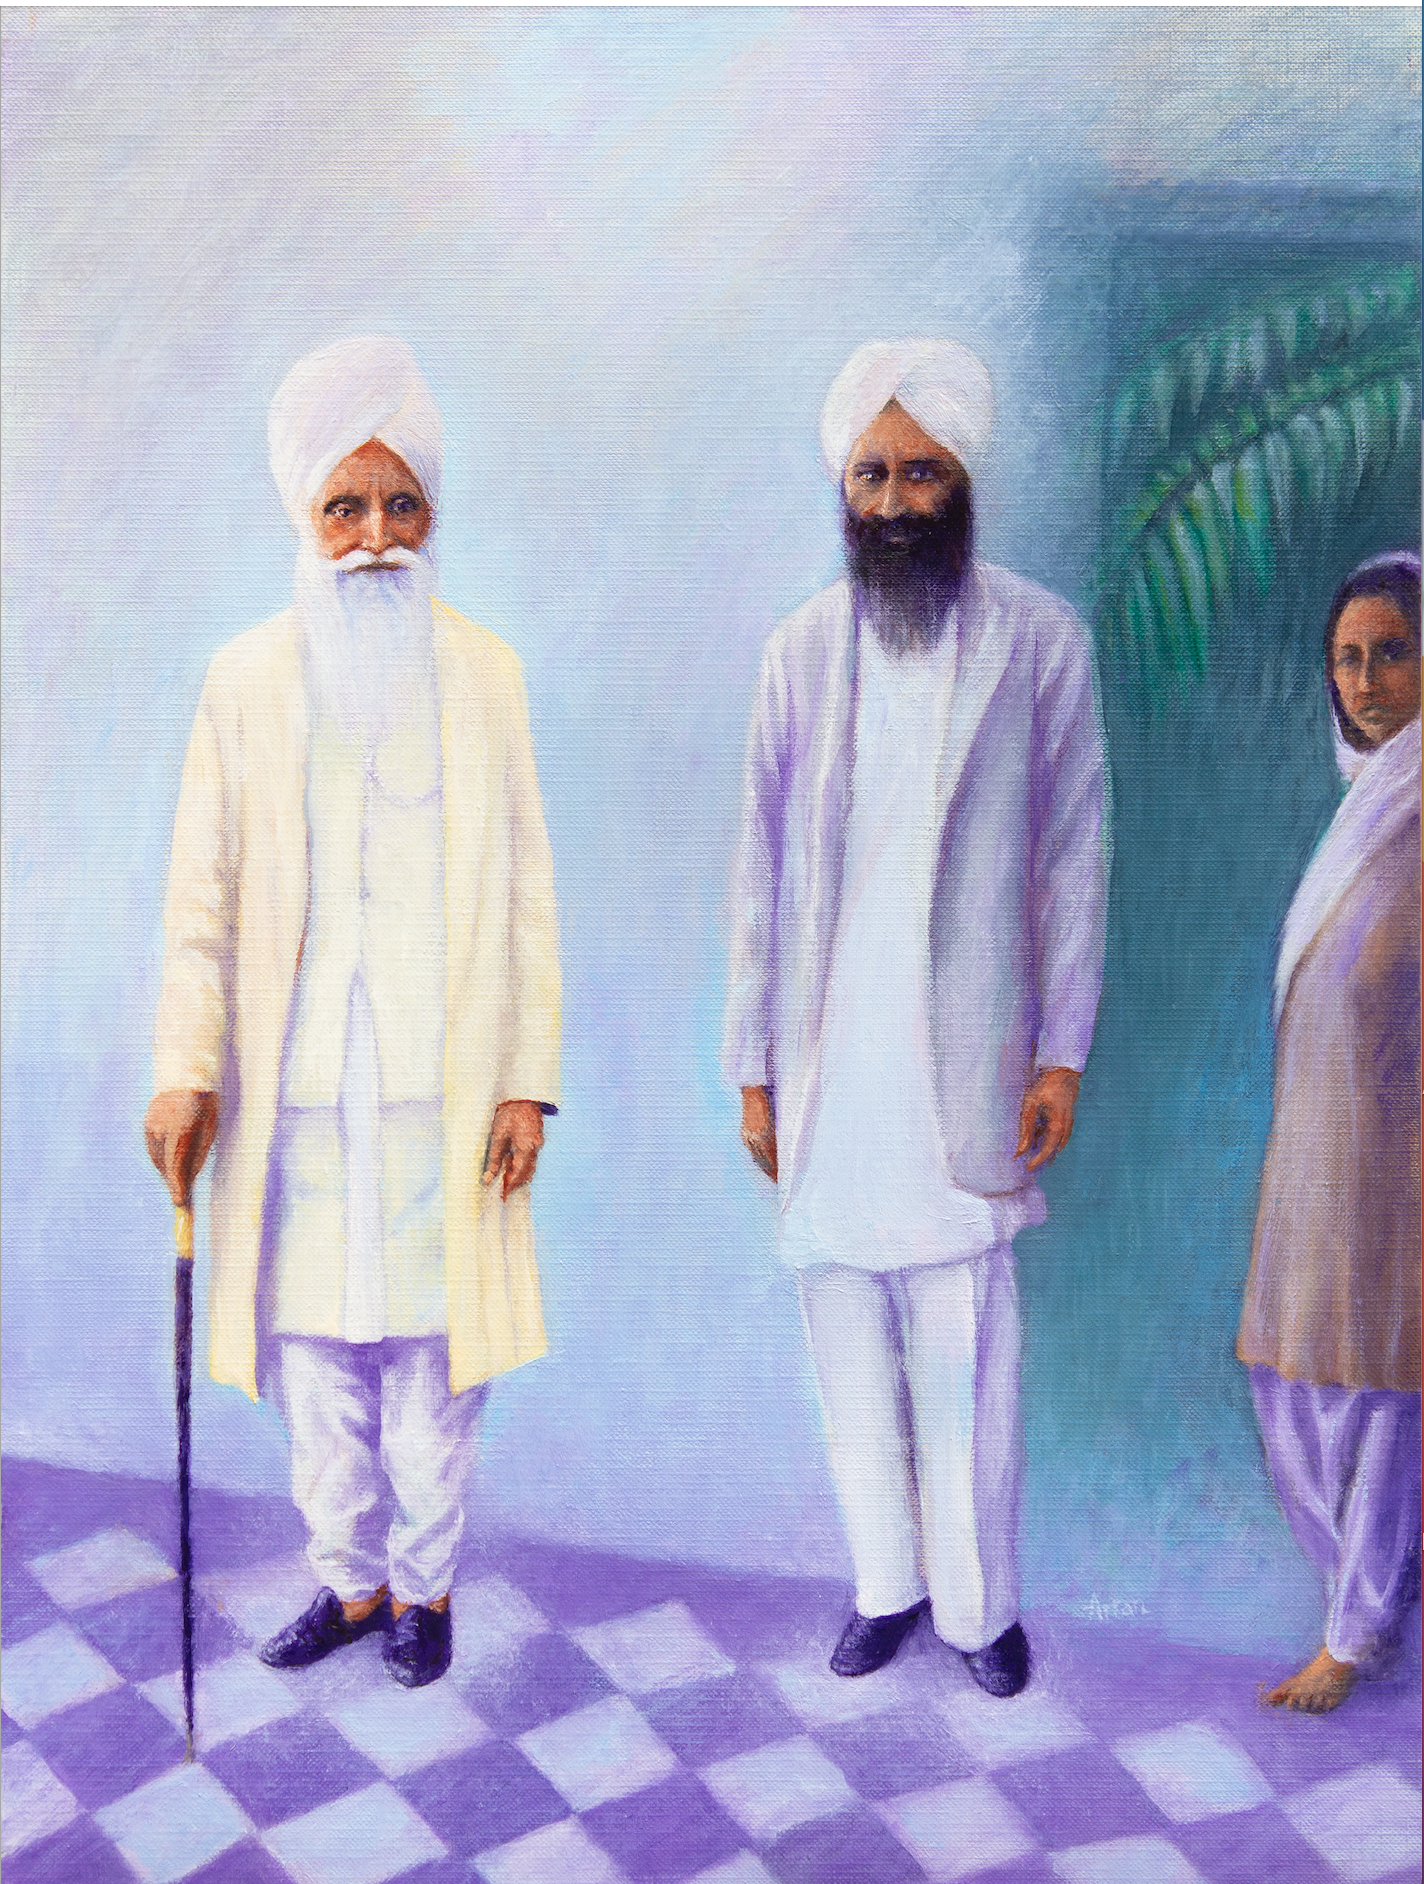 “The Great Master and the Great Disciple, Hazur / Kirpal”, circa 1930’s. 